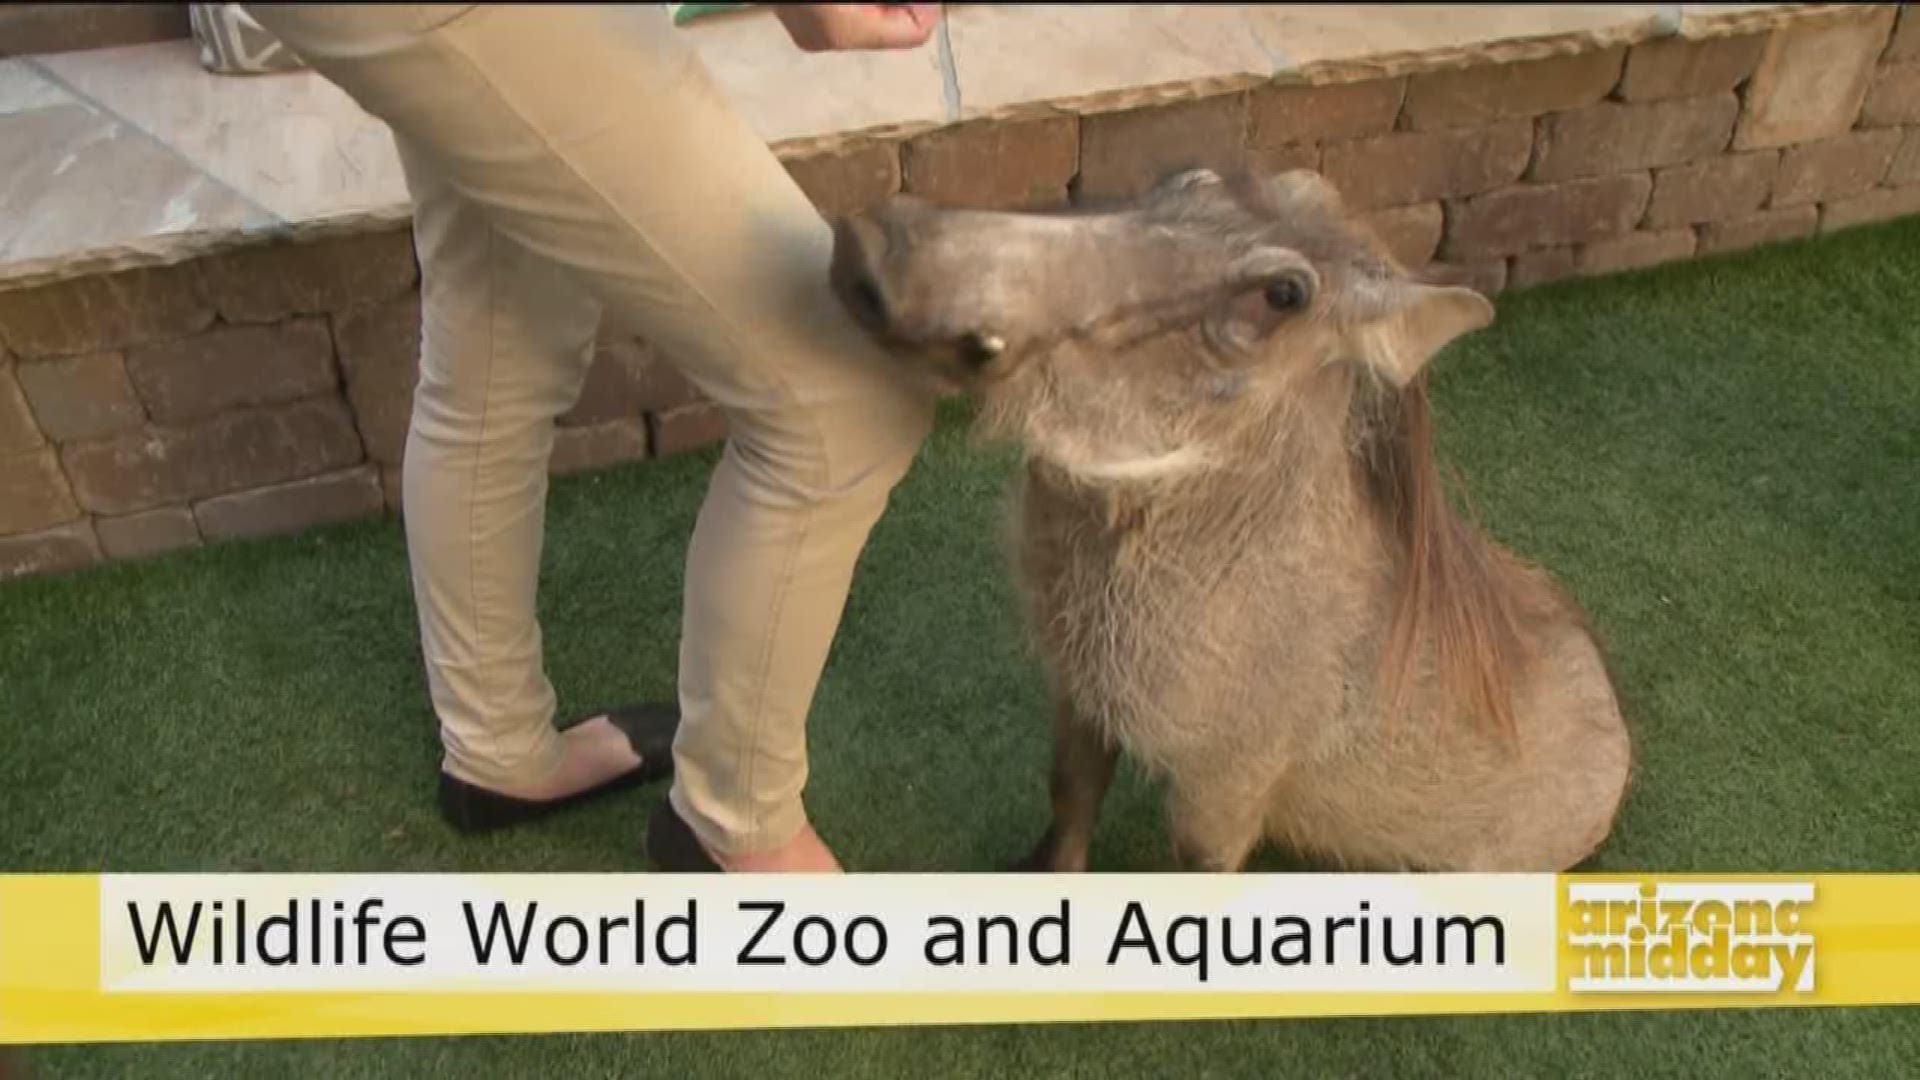 Kristy Morcom from the Wildlife World Zoo brings in Waylon the warthog.